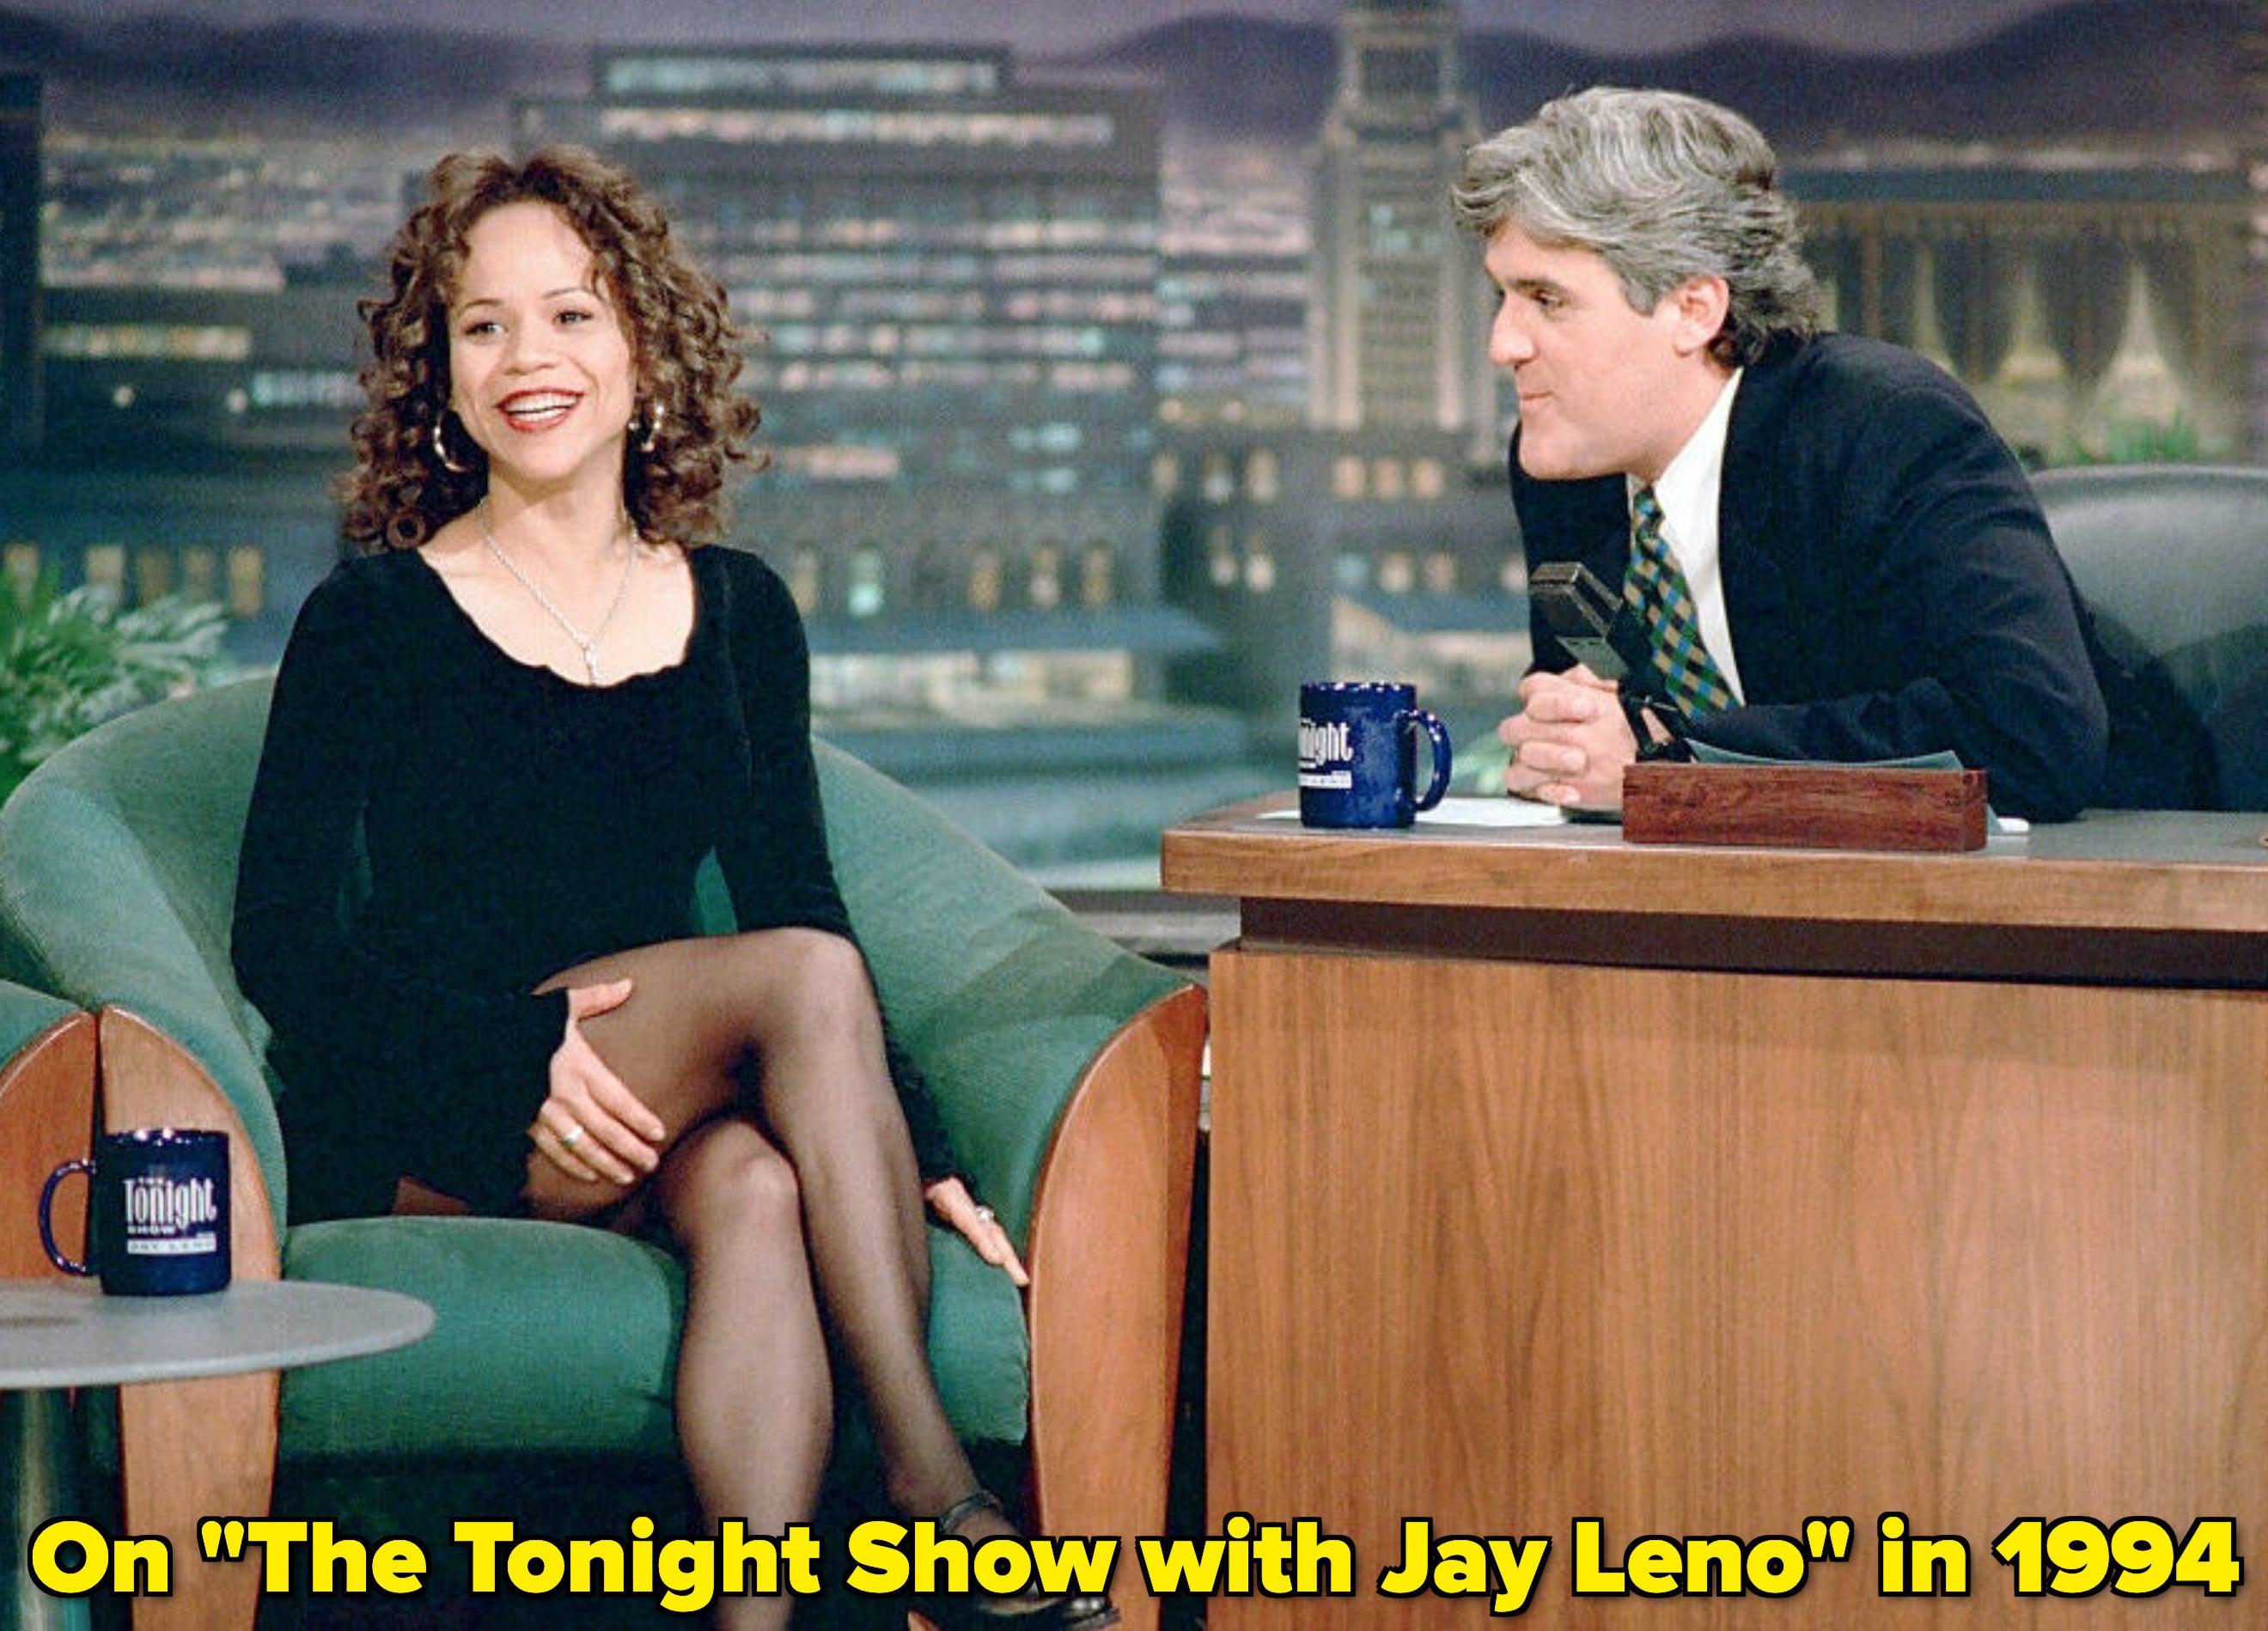 Rosie Perez being interviewed by Jay Leno